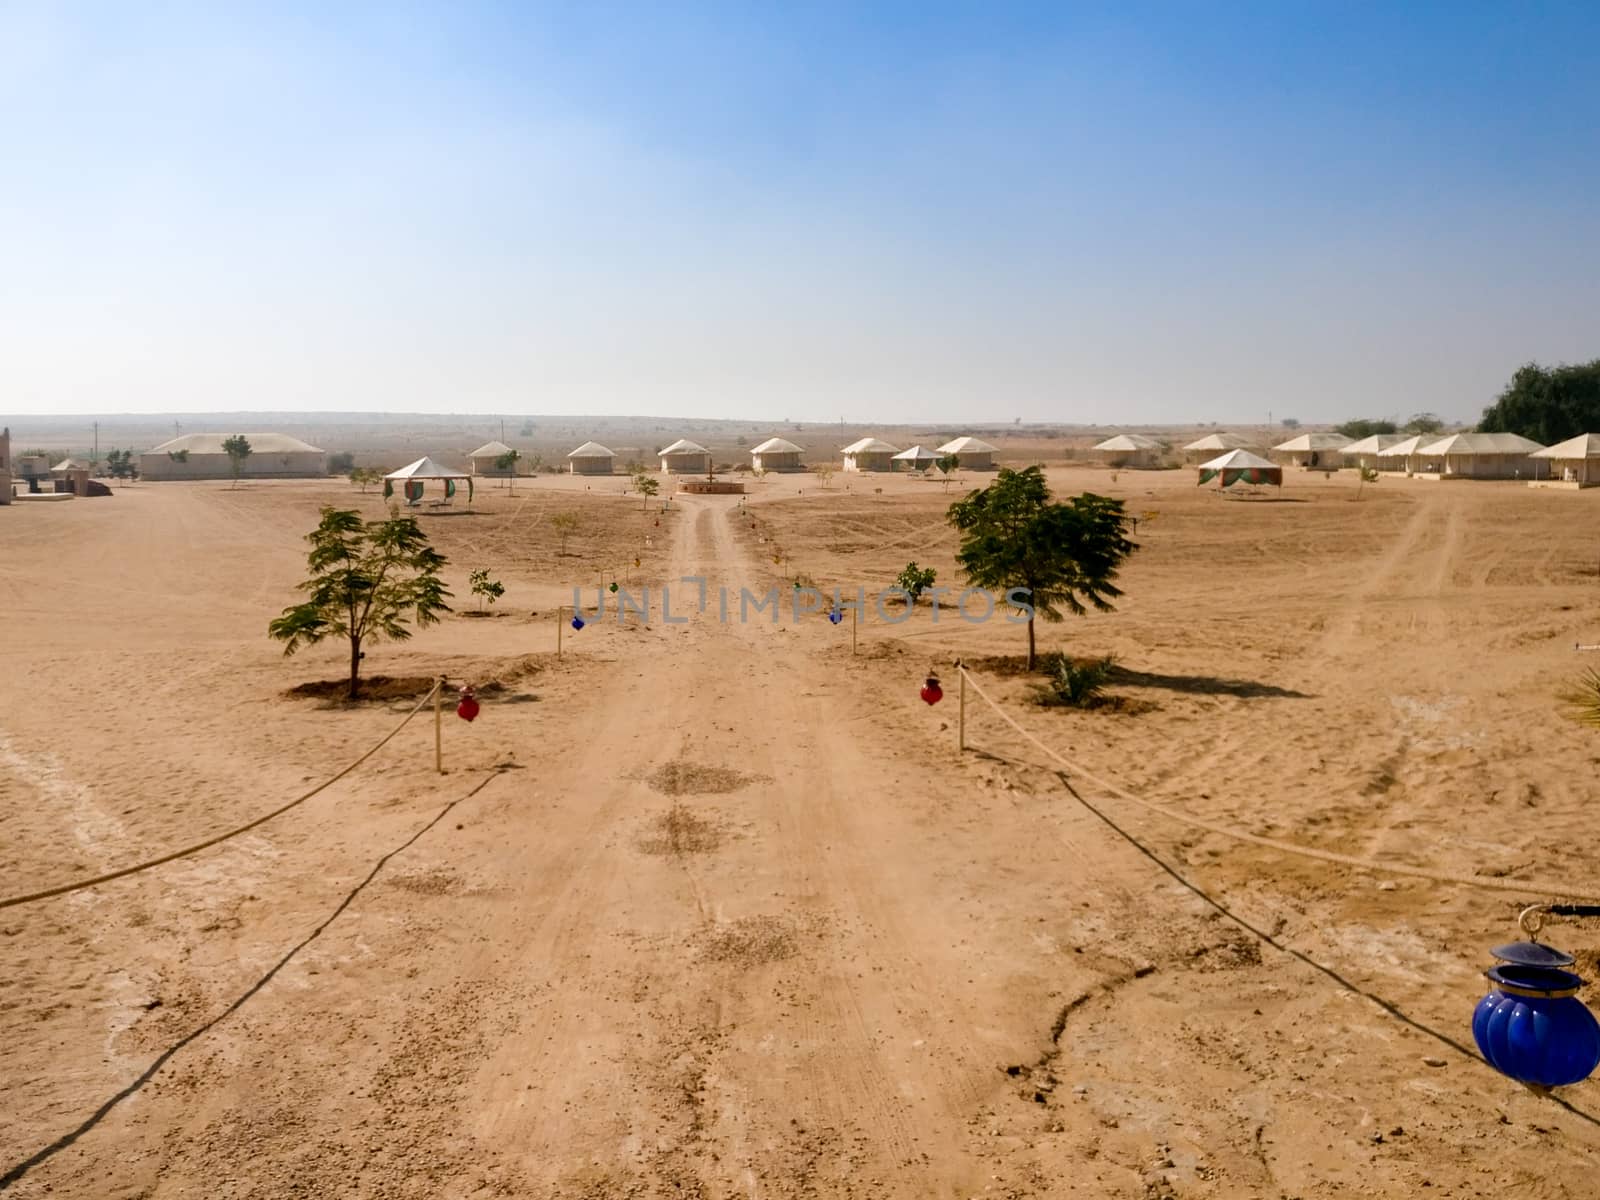 Empty dirt road with barren desert on both sides and blue sky above showing thar desert of rajasthan india. Shows the tents of a desert camp in the distance with lanterns hanging on the side